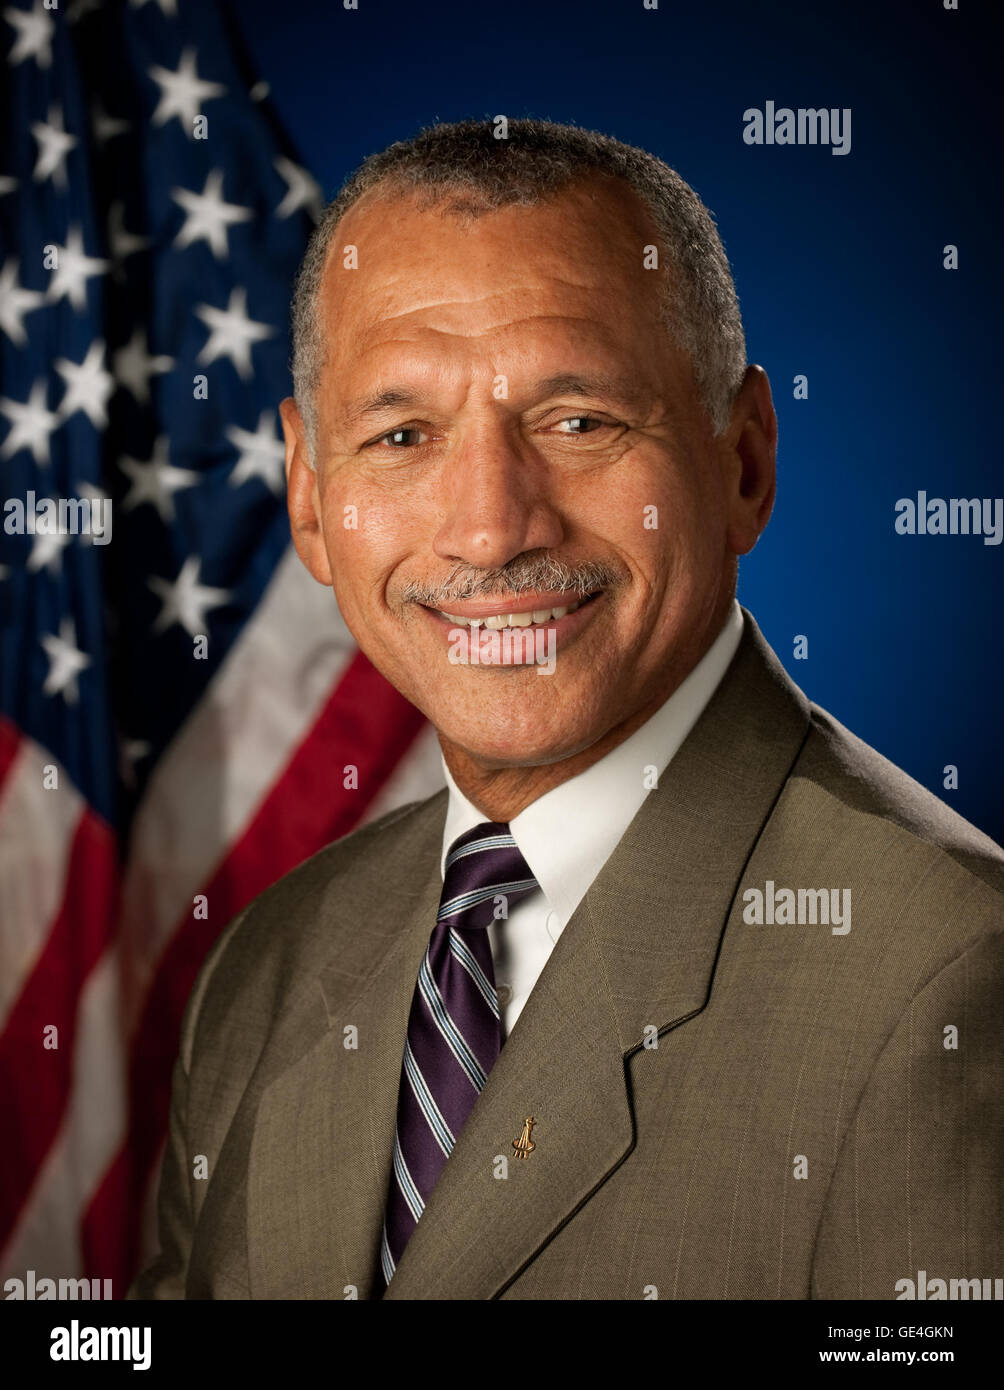 Nominated by President Barack Obama and confirmed by the U.S. Senate, retired Marine Corps Major General Charles Frank Bolden, Jr. was appointed NASA’s twelth Administrator on July 17, 2009. Bolden’s career with NASA began when he was selected as an astronaut candidate in 1980. He flew on a number of Space Shuttle missions, piloting STS-61C and STS-31 and commanding STS-45 and STS-60, and also held a number of technical positions within the agency. Bolden received his bachelor's degree in electrical science from the United States Naval Academy and his master's in Systems Management from the Un Stock Photo